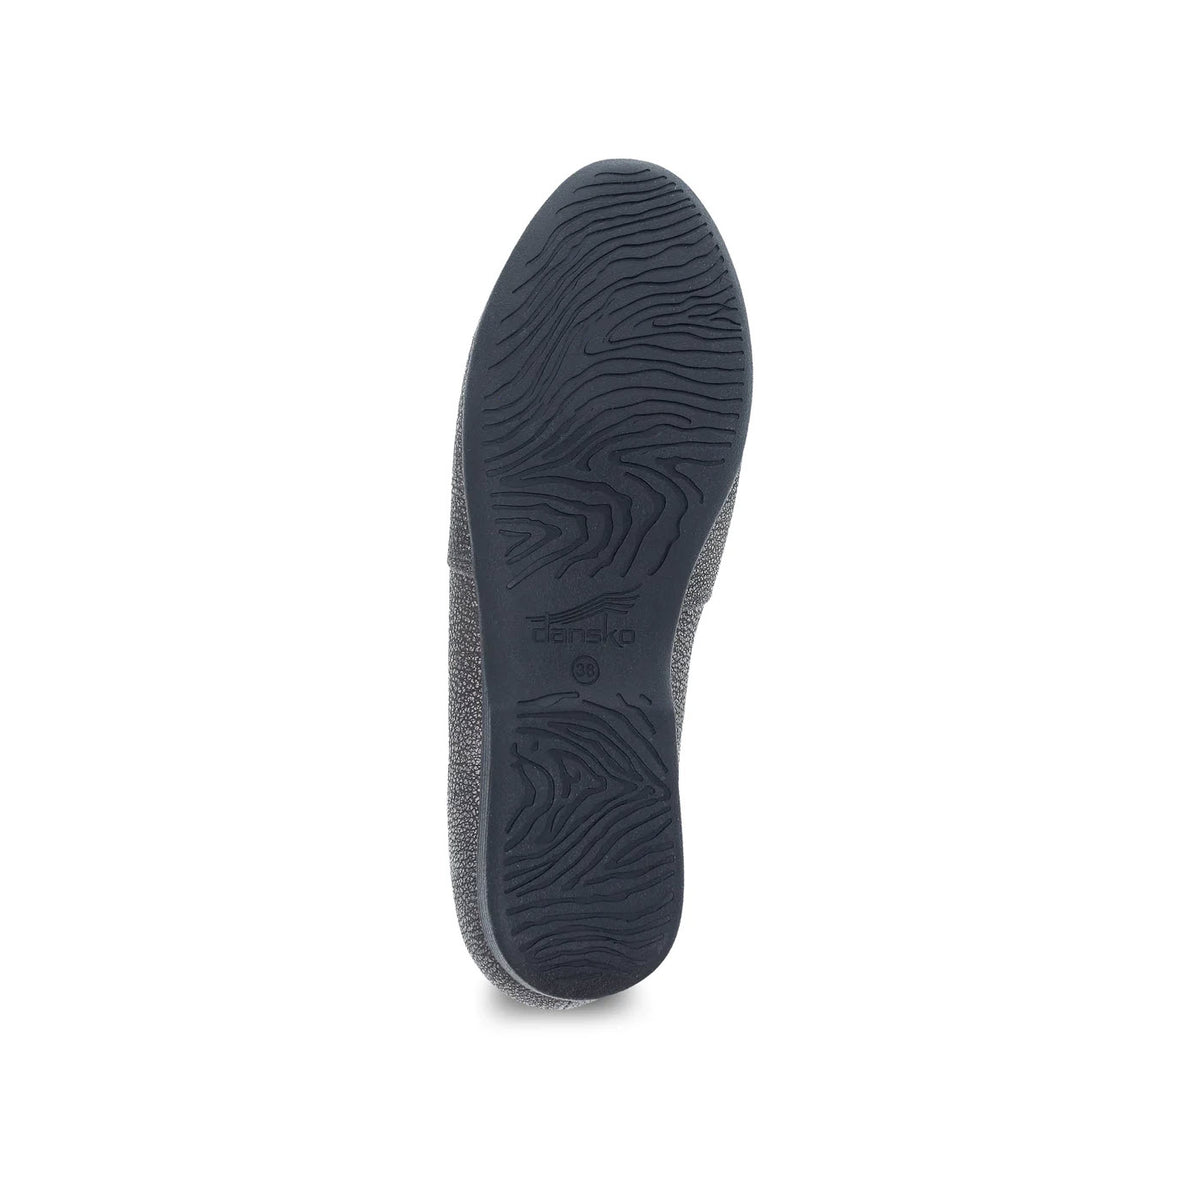 Bottom view of a DANSKO LARISA PEWTER METALLIC - WOMENS showcasing a black textured sole with arch support and the Dansko brand logo.